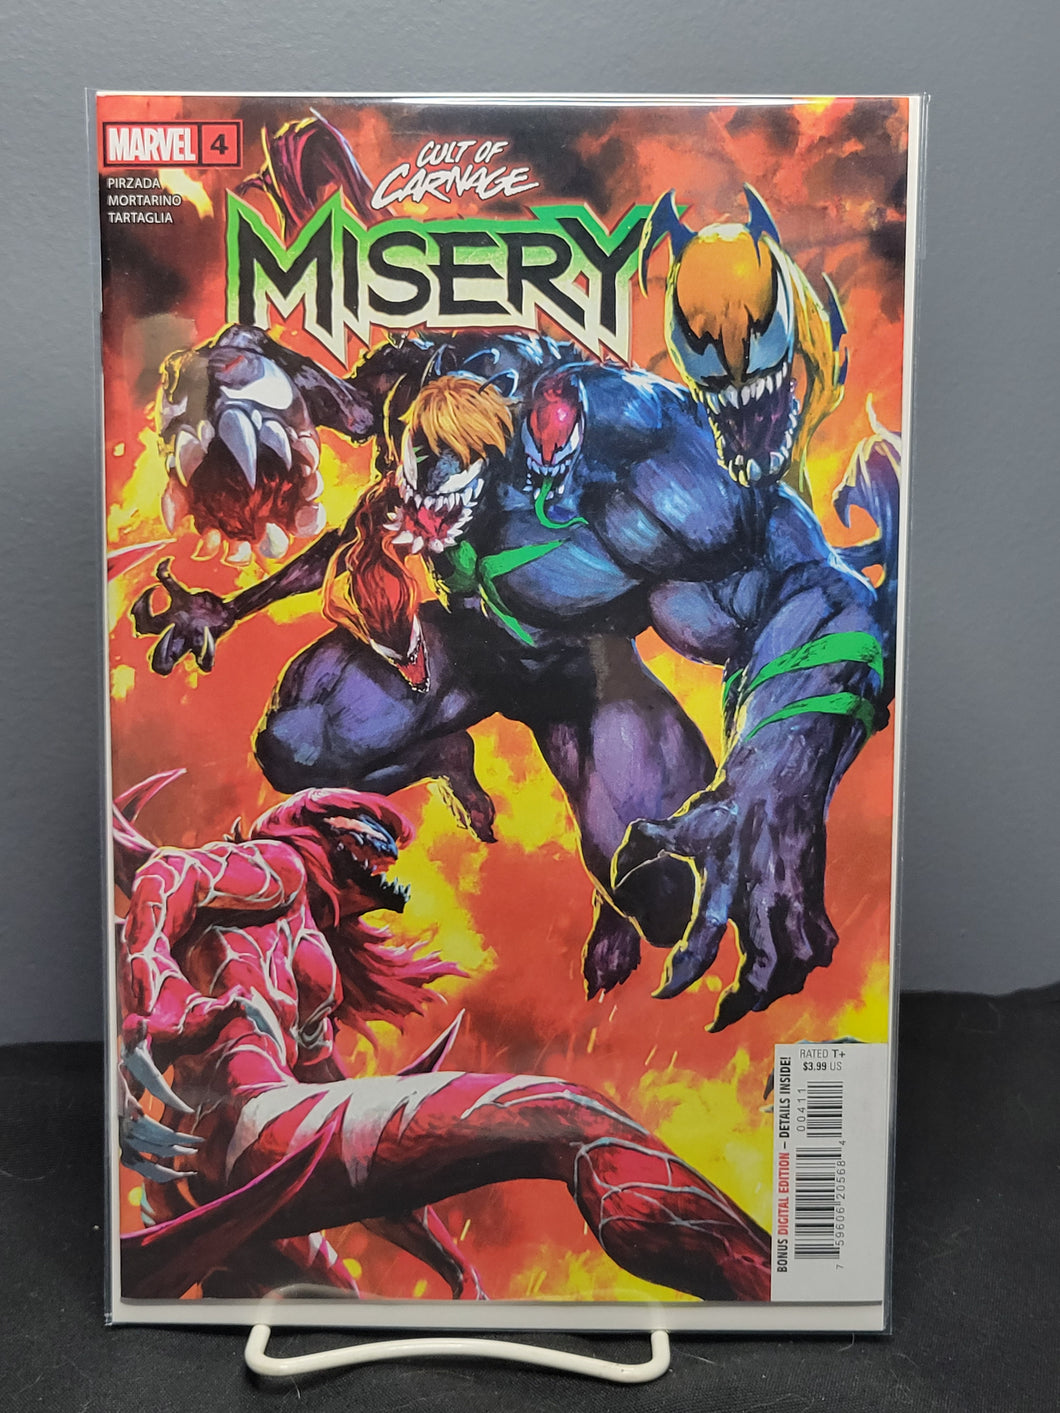 Cult Of Carnage Misery #4